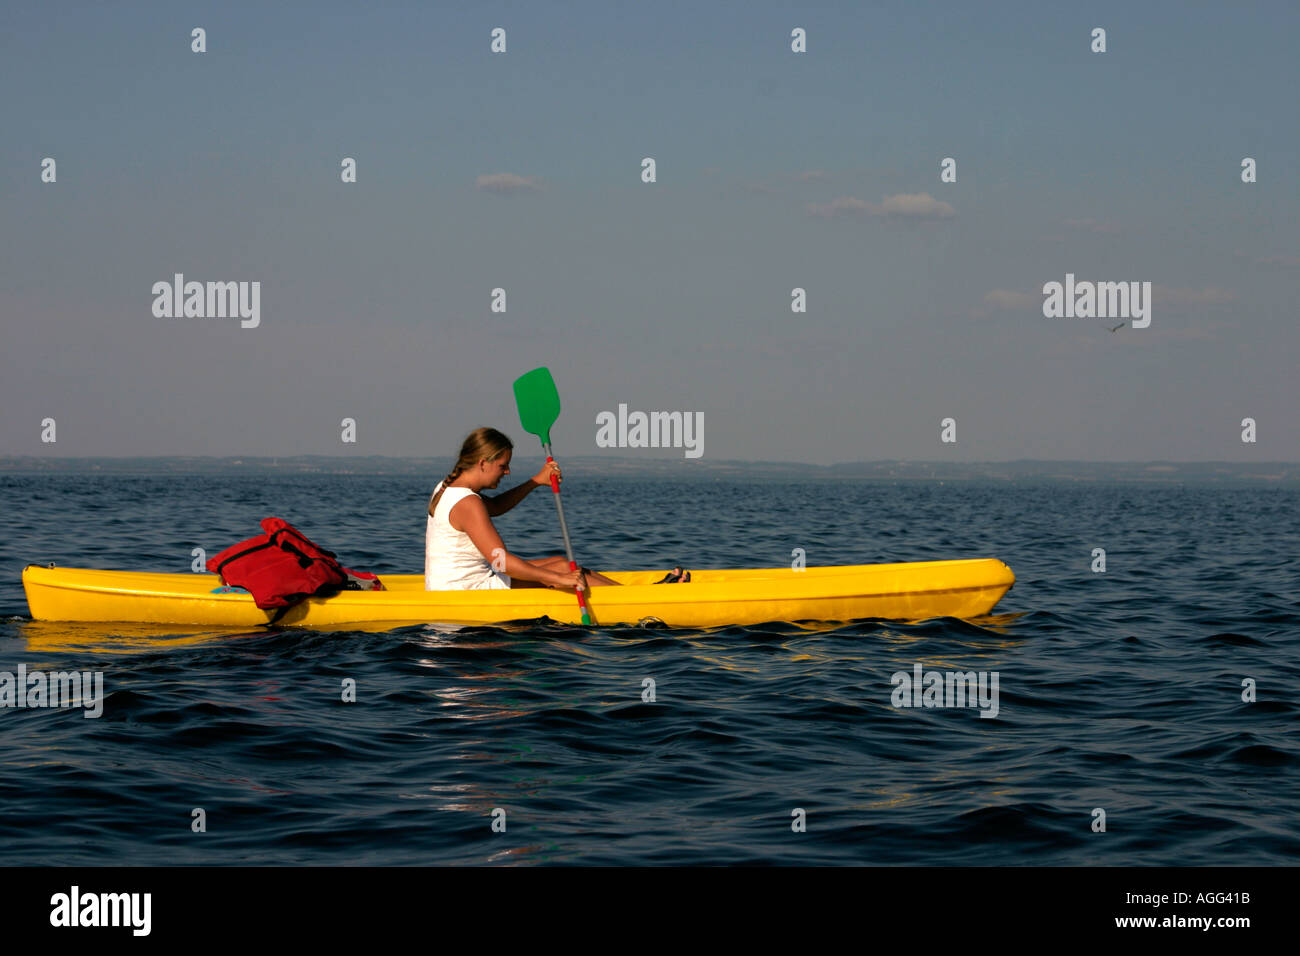 Kayakers Kullen Skåne Summer Mood High Resolution Stock Photography and  Images - Alamy